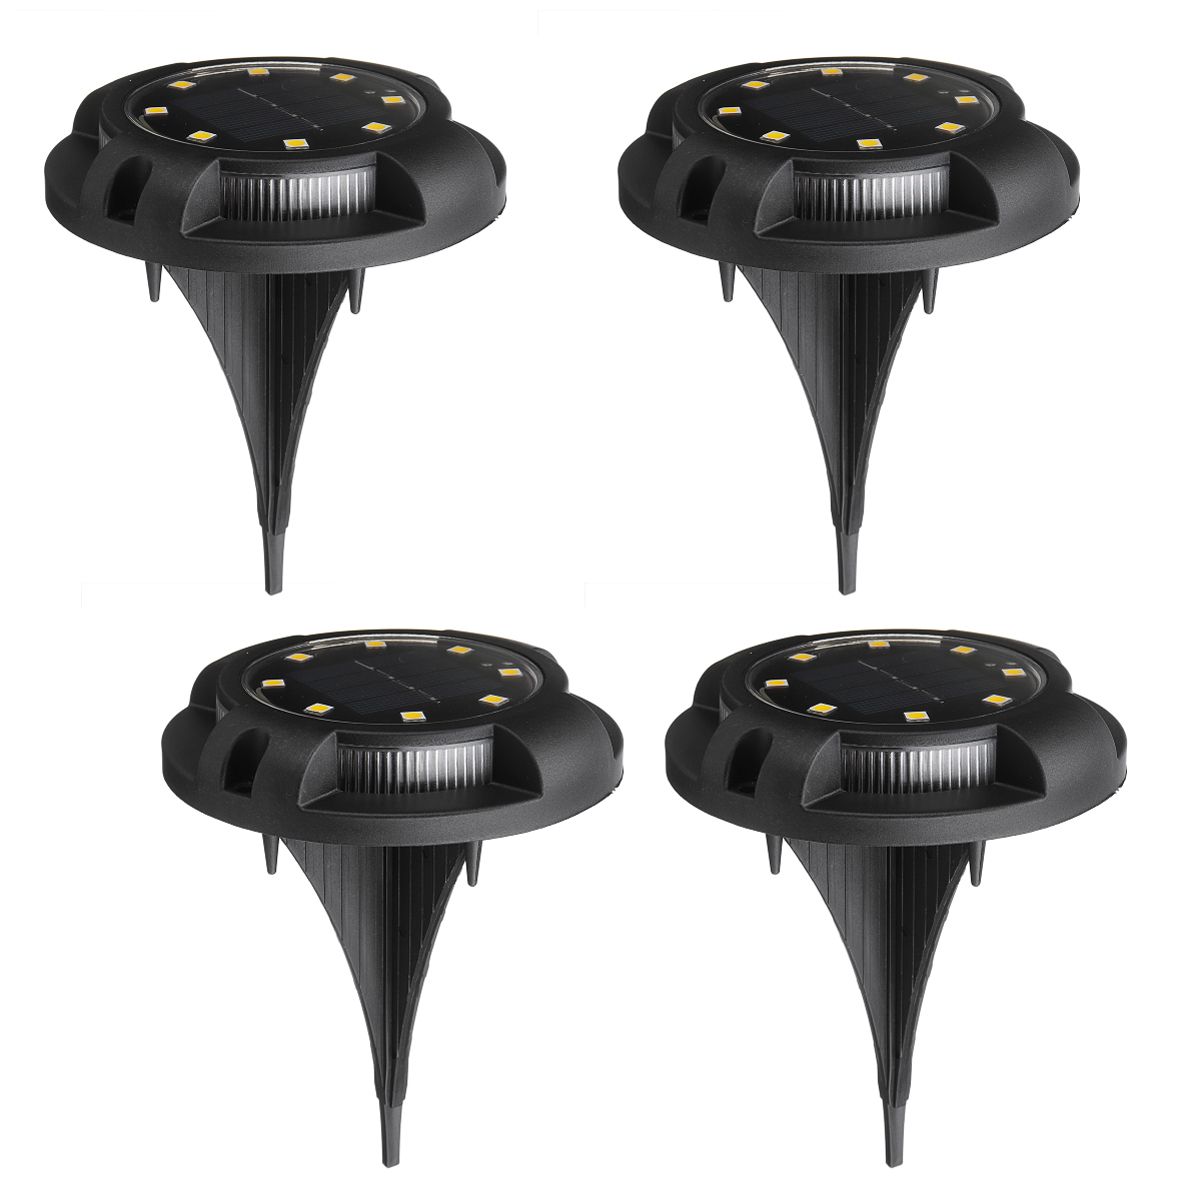 4PCS-LED-Solar-Powered-Ground-Lawn-Light-Garden-Pathway-Outdoor-Aisle-Lamp-Waterproof-1734845